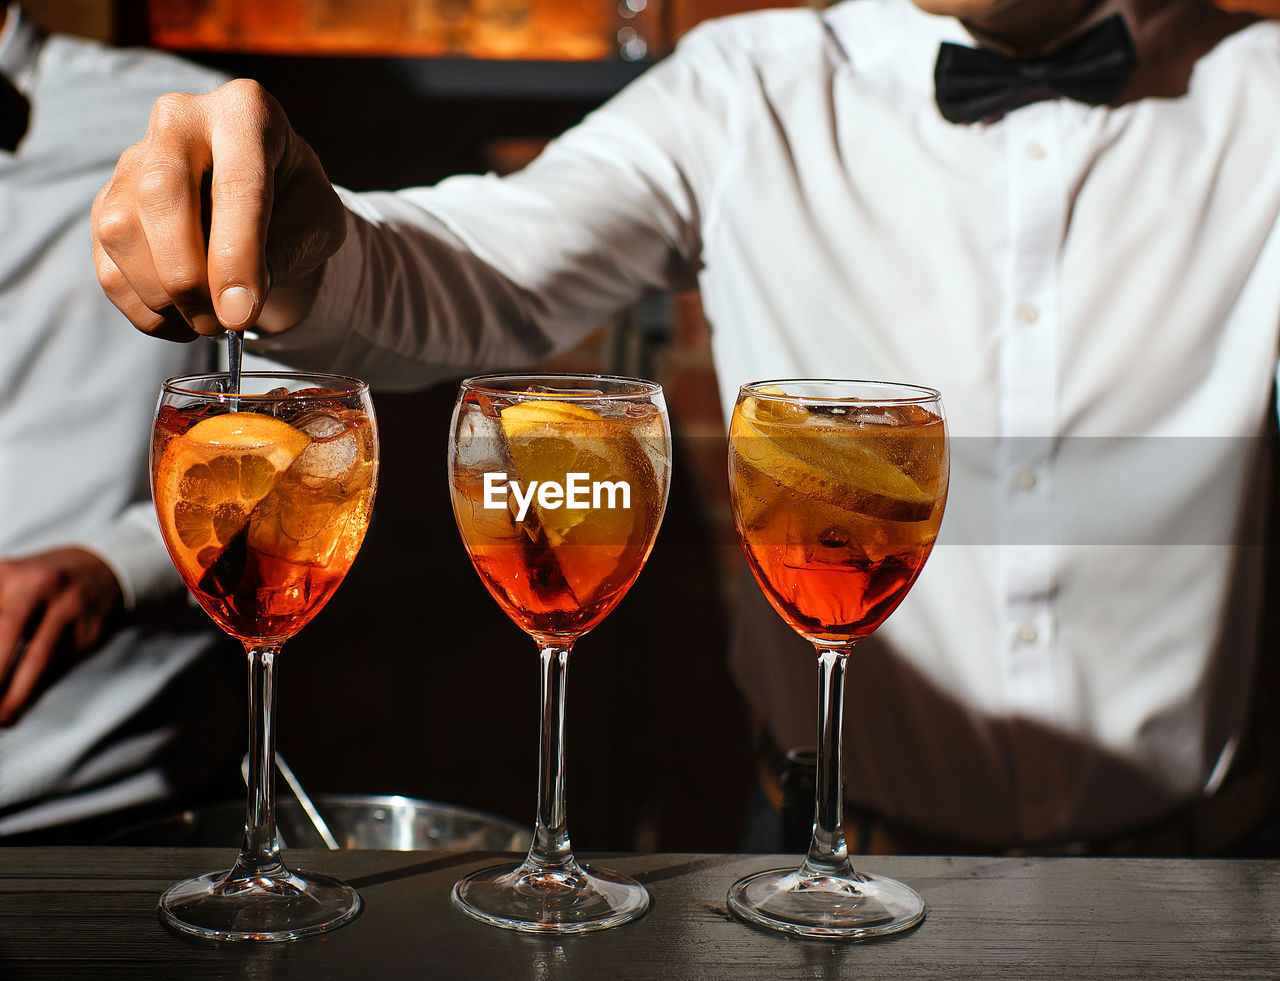 Three glass glasses with an aperol spritz cocktail are on bar bartender is stirring one of aperitifs